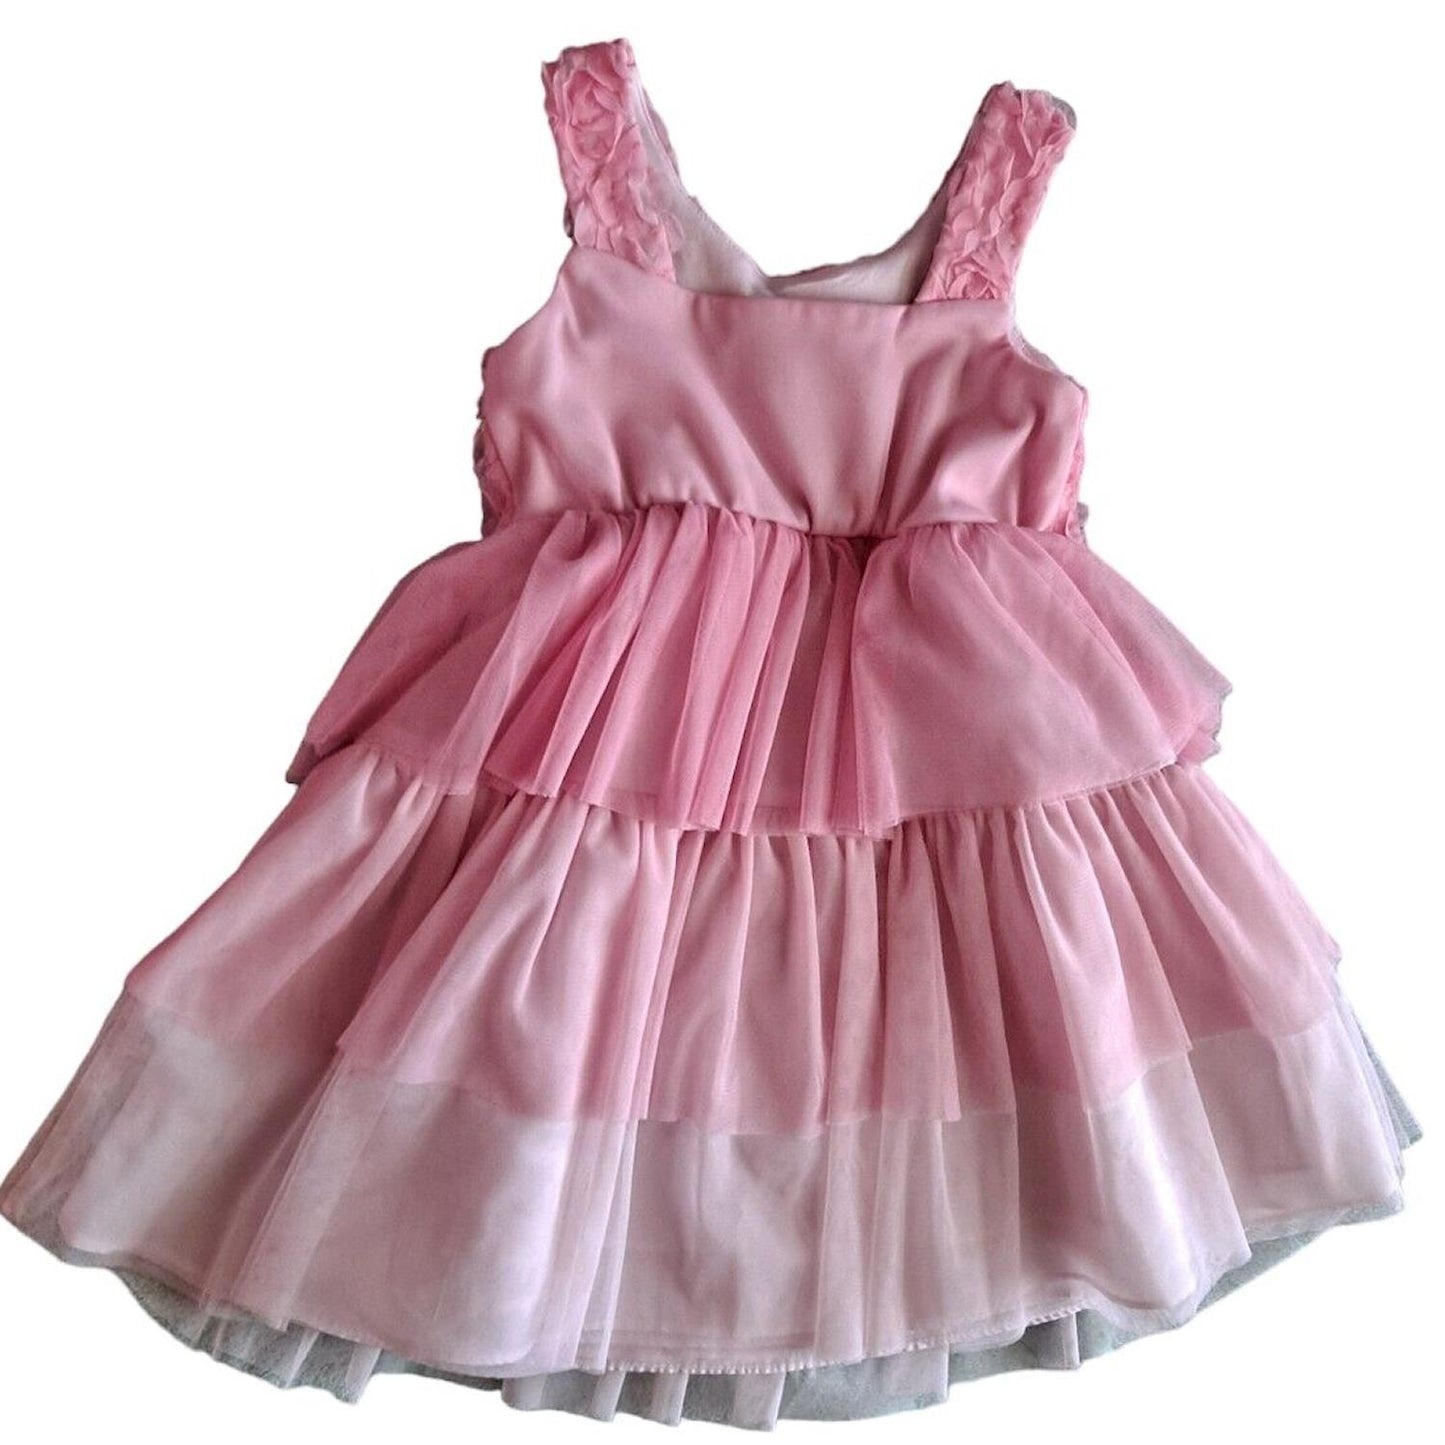 Bonnie Jean Ruffled Tiered Knee Length Ombre Party Dress Rosette Detail